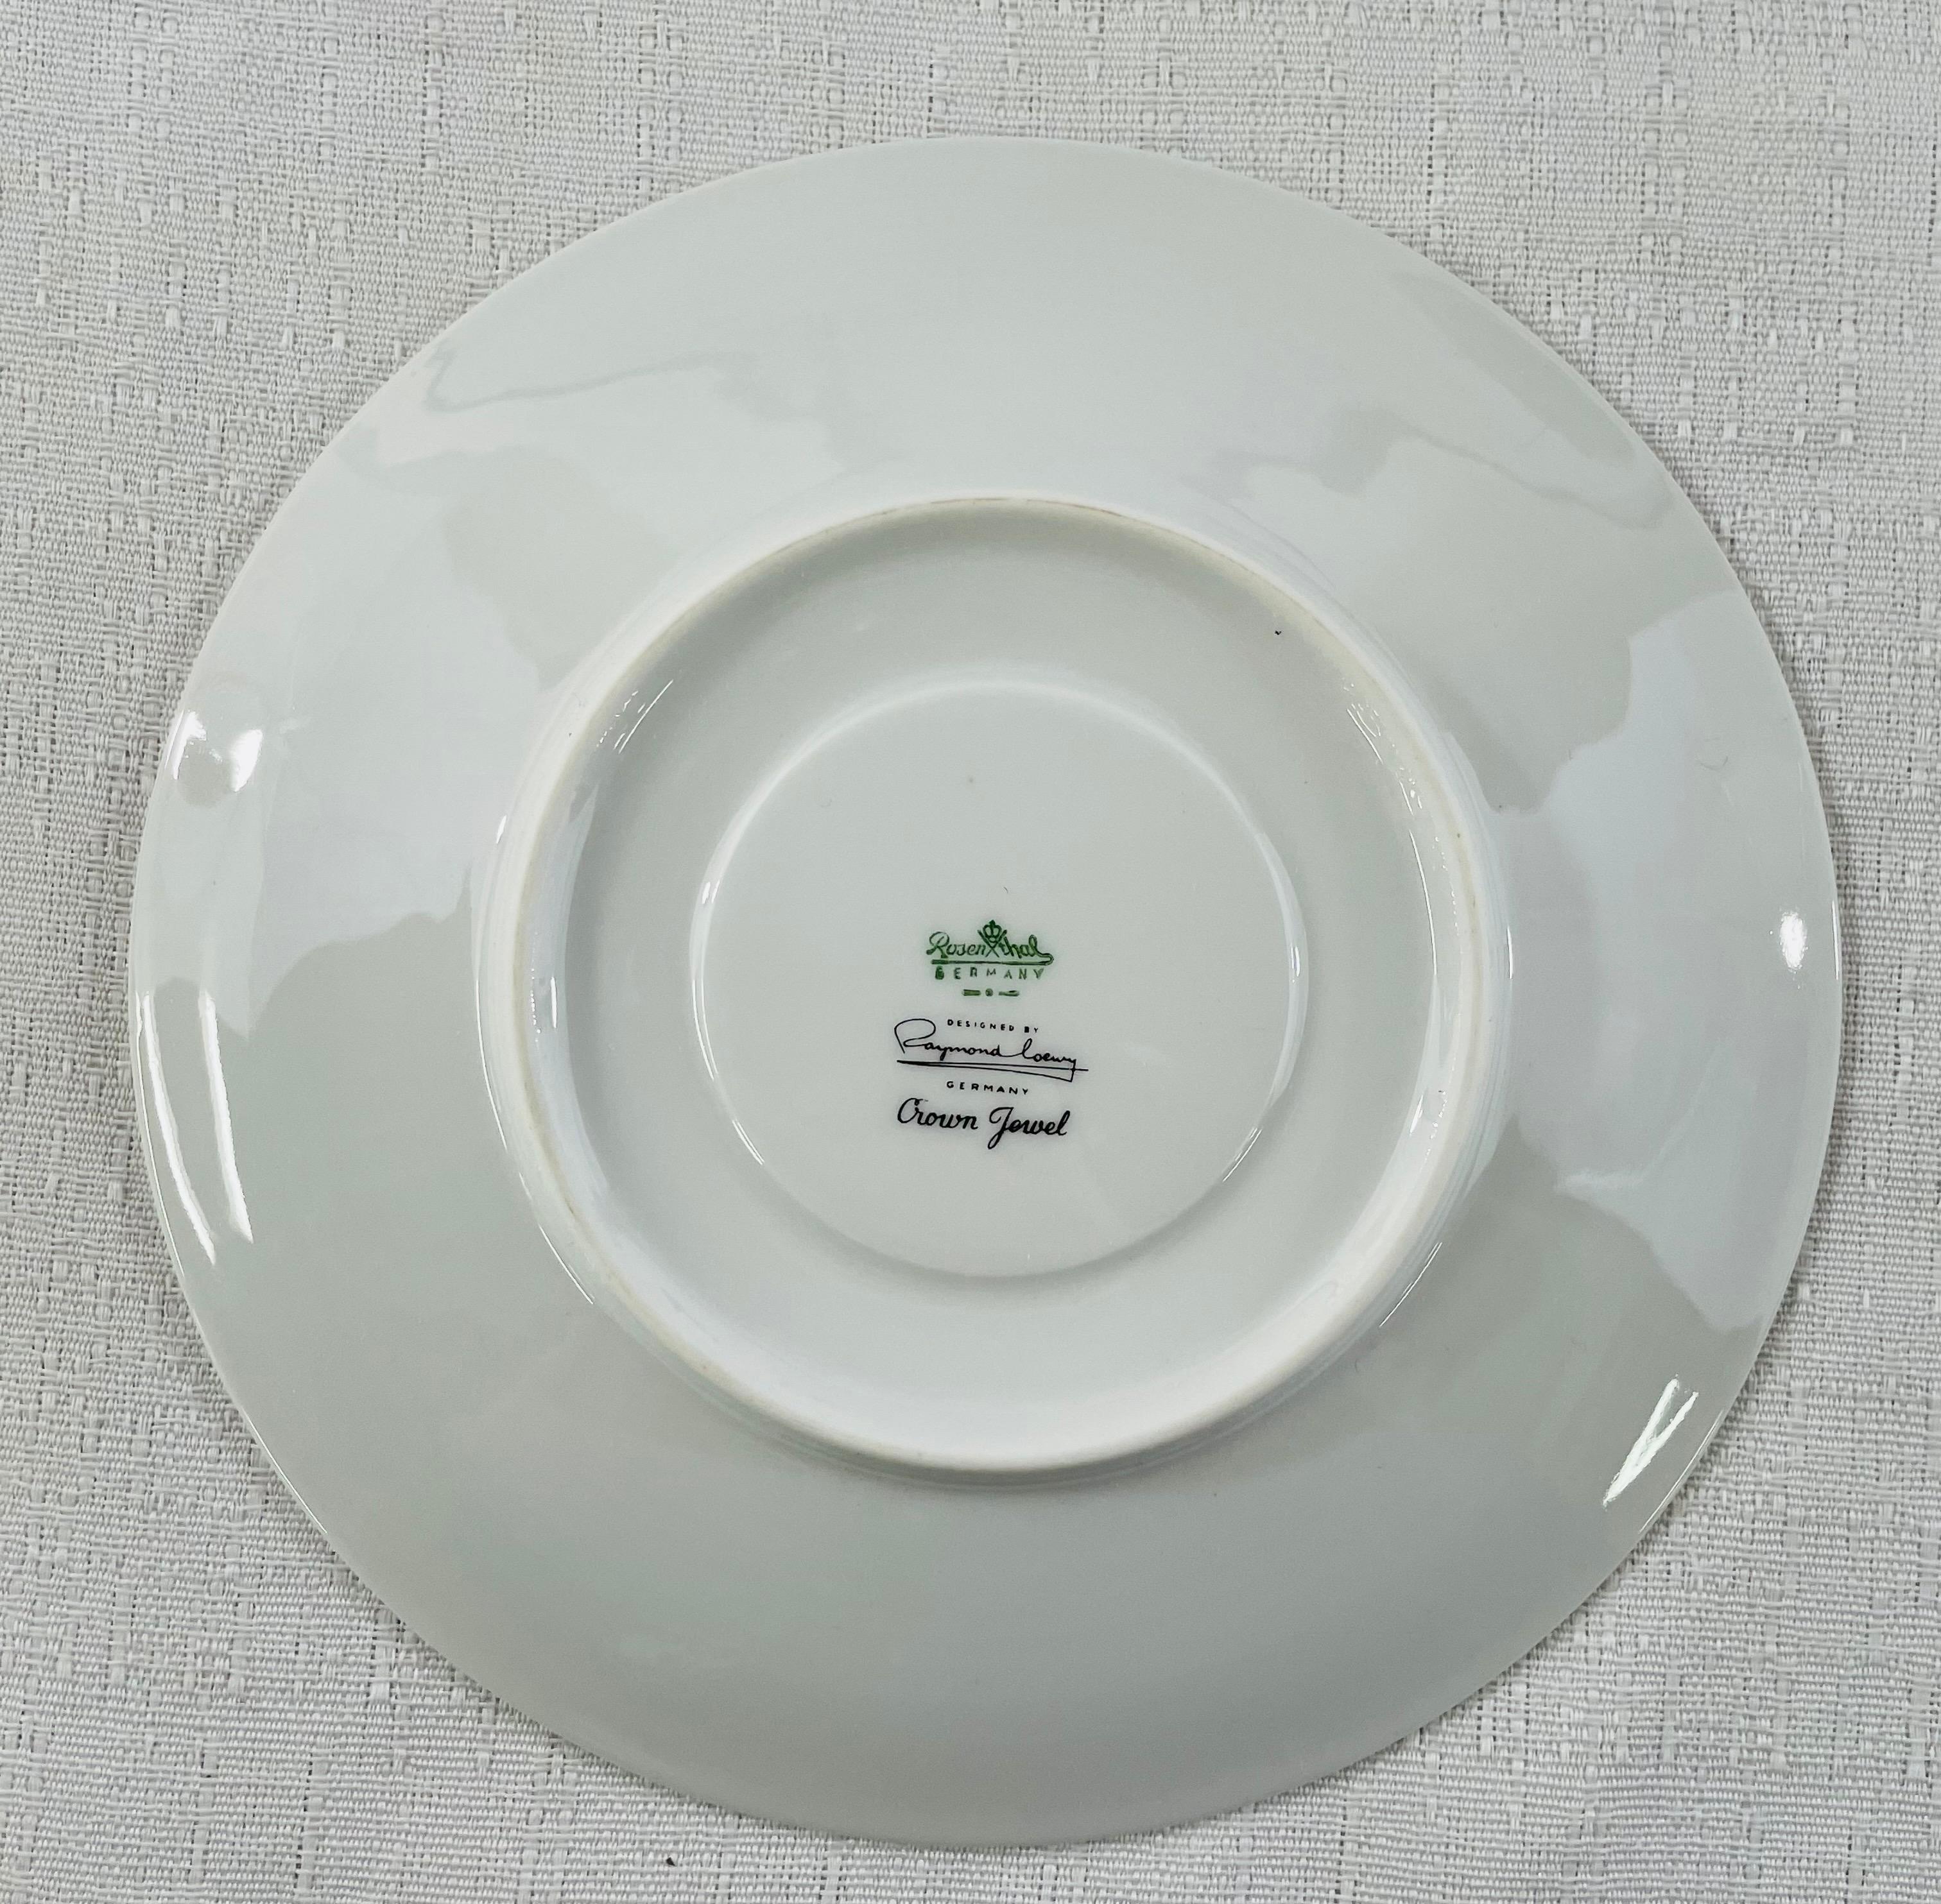 discontinued rosenthal china patterns